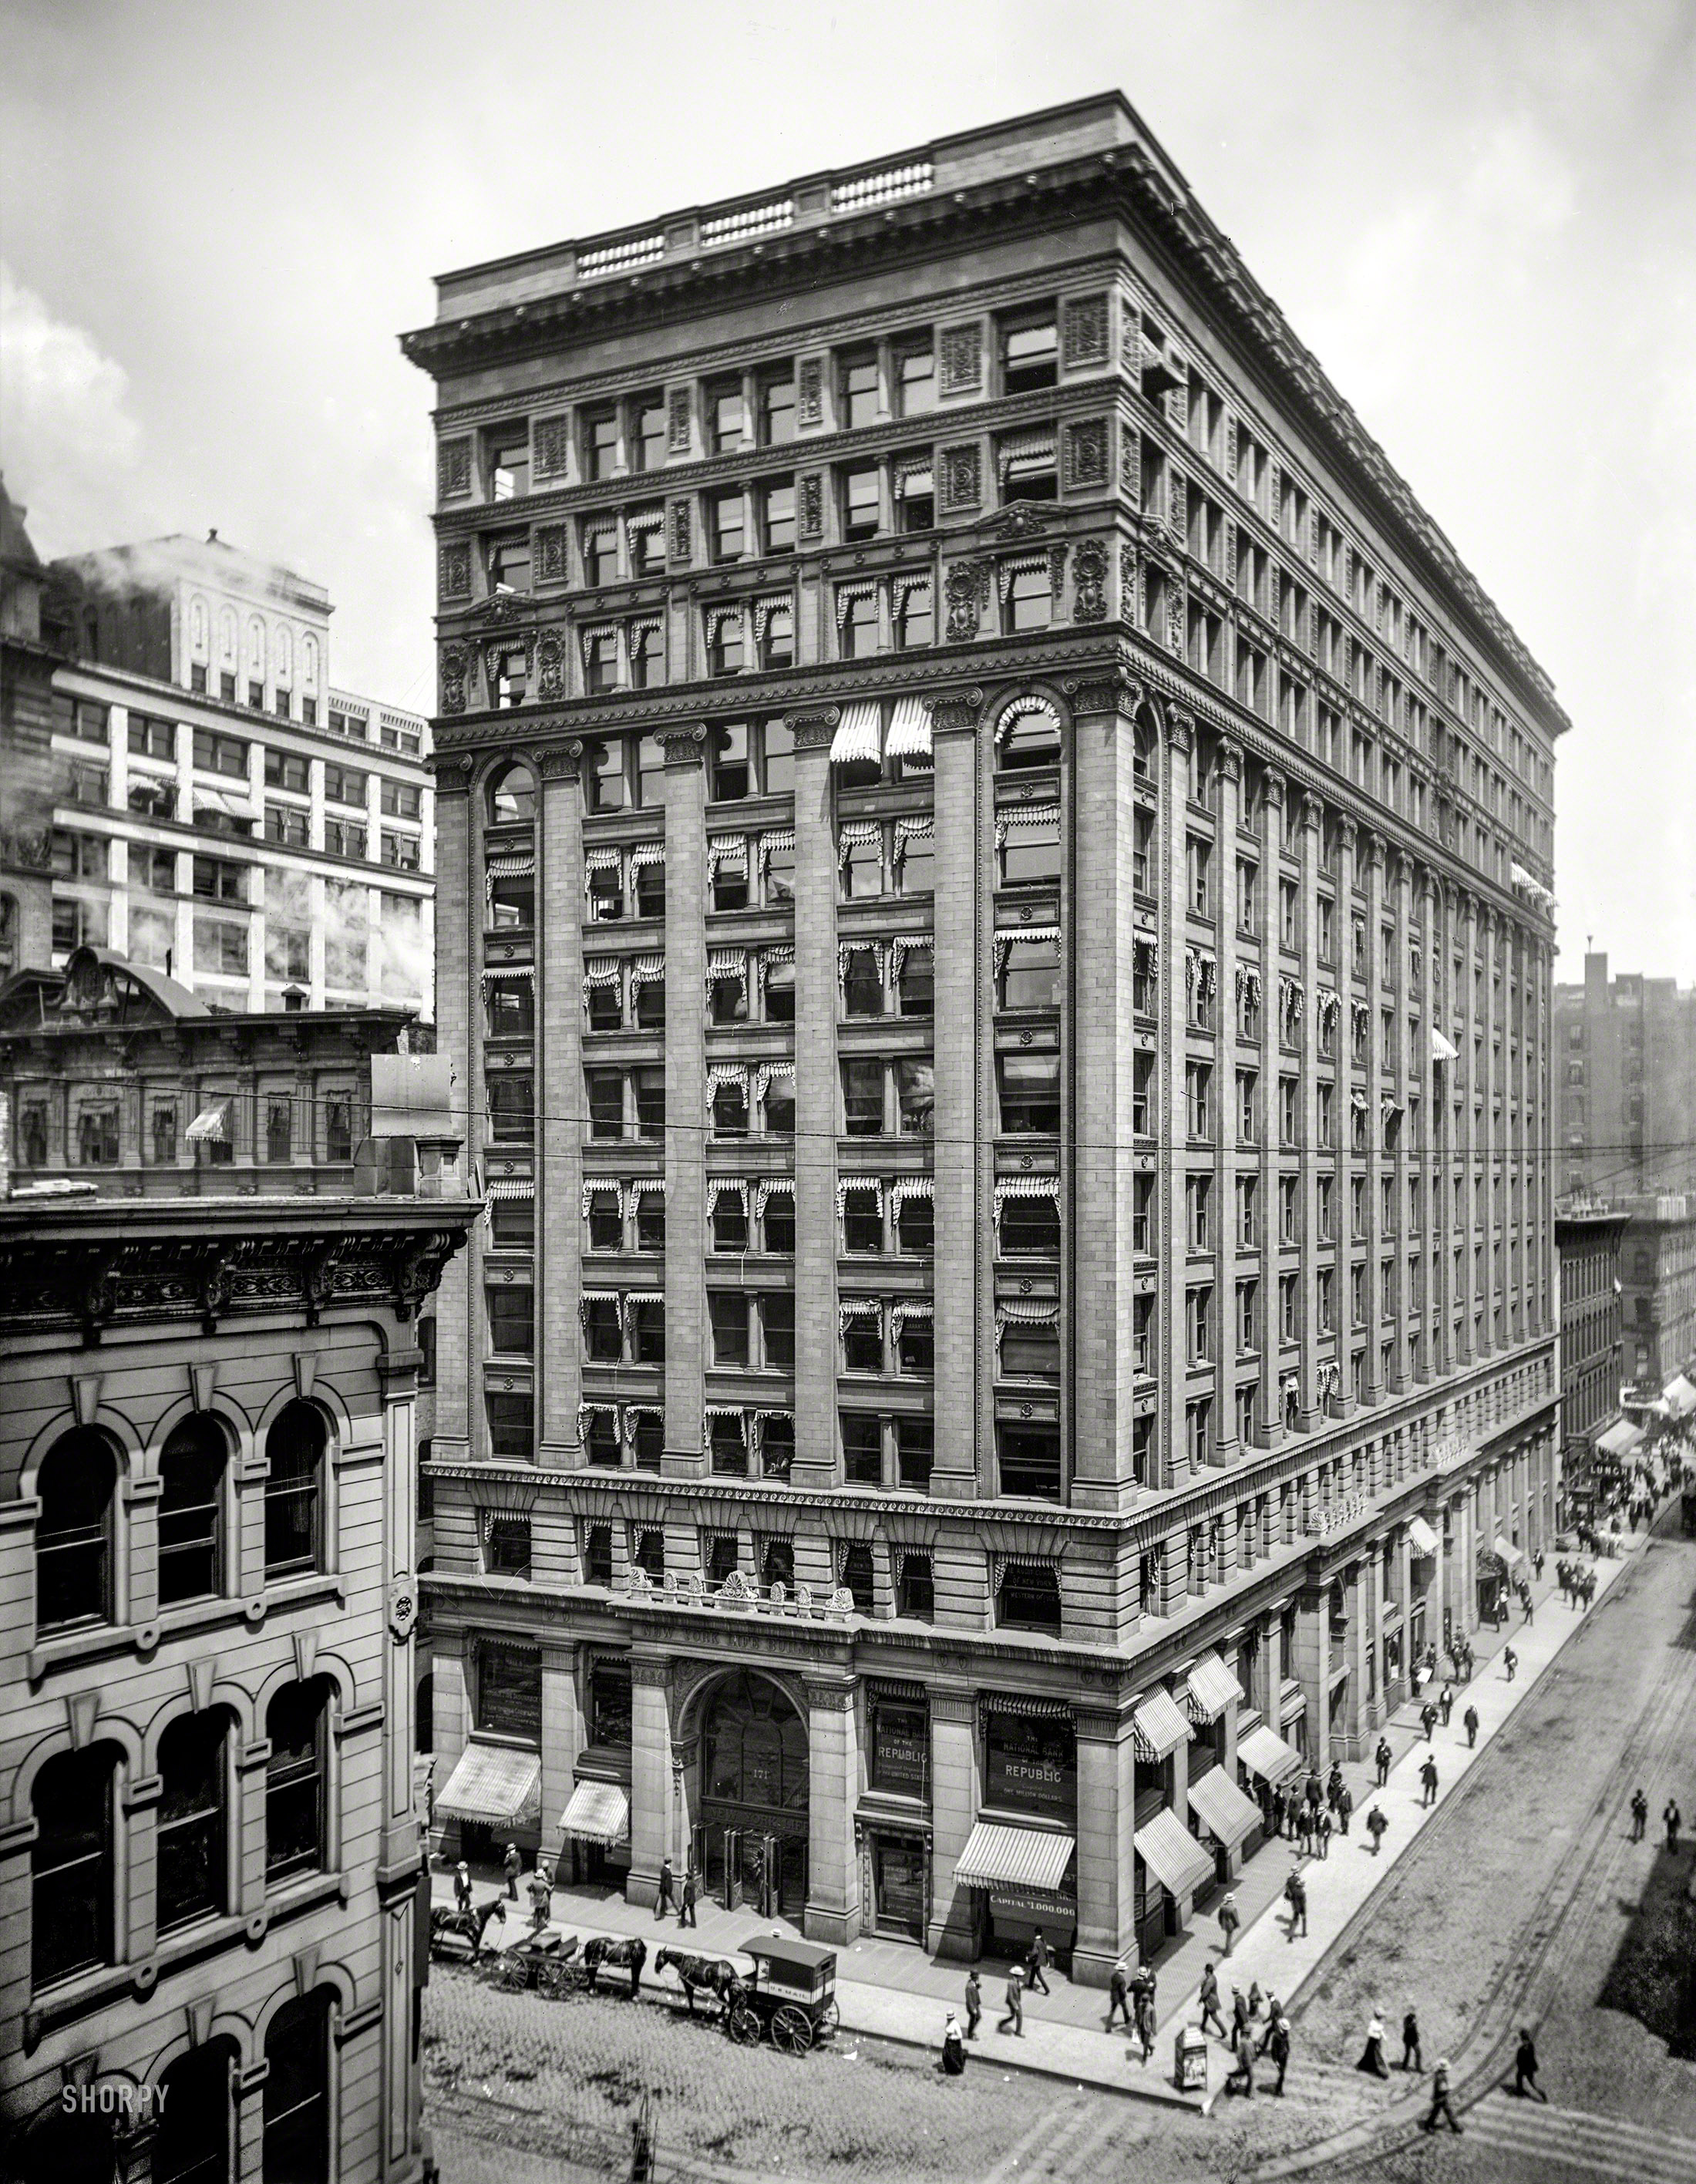 September 11, 1900. "New York Life building, Chicago." The building, at LaSalle and Monroe streets, was completed in 1894, with major additions in 1898 and 1903. 8x10 inch glass negative, Detroit Publishing Company. View full size.